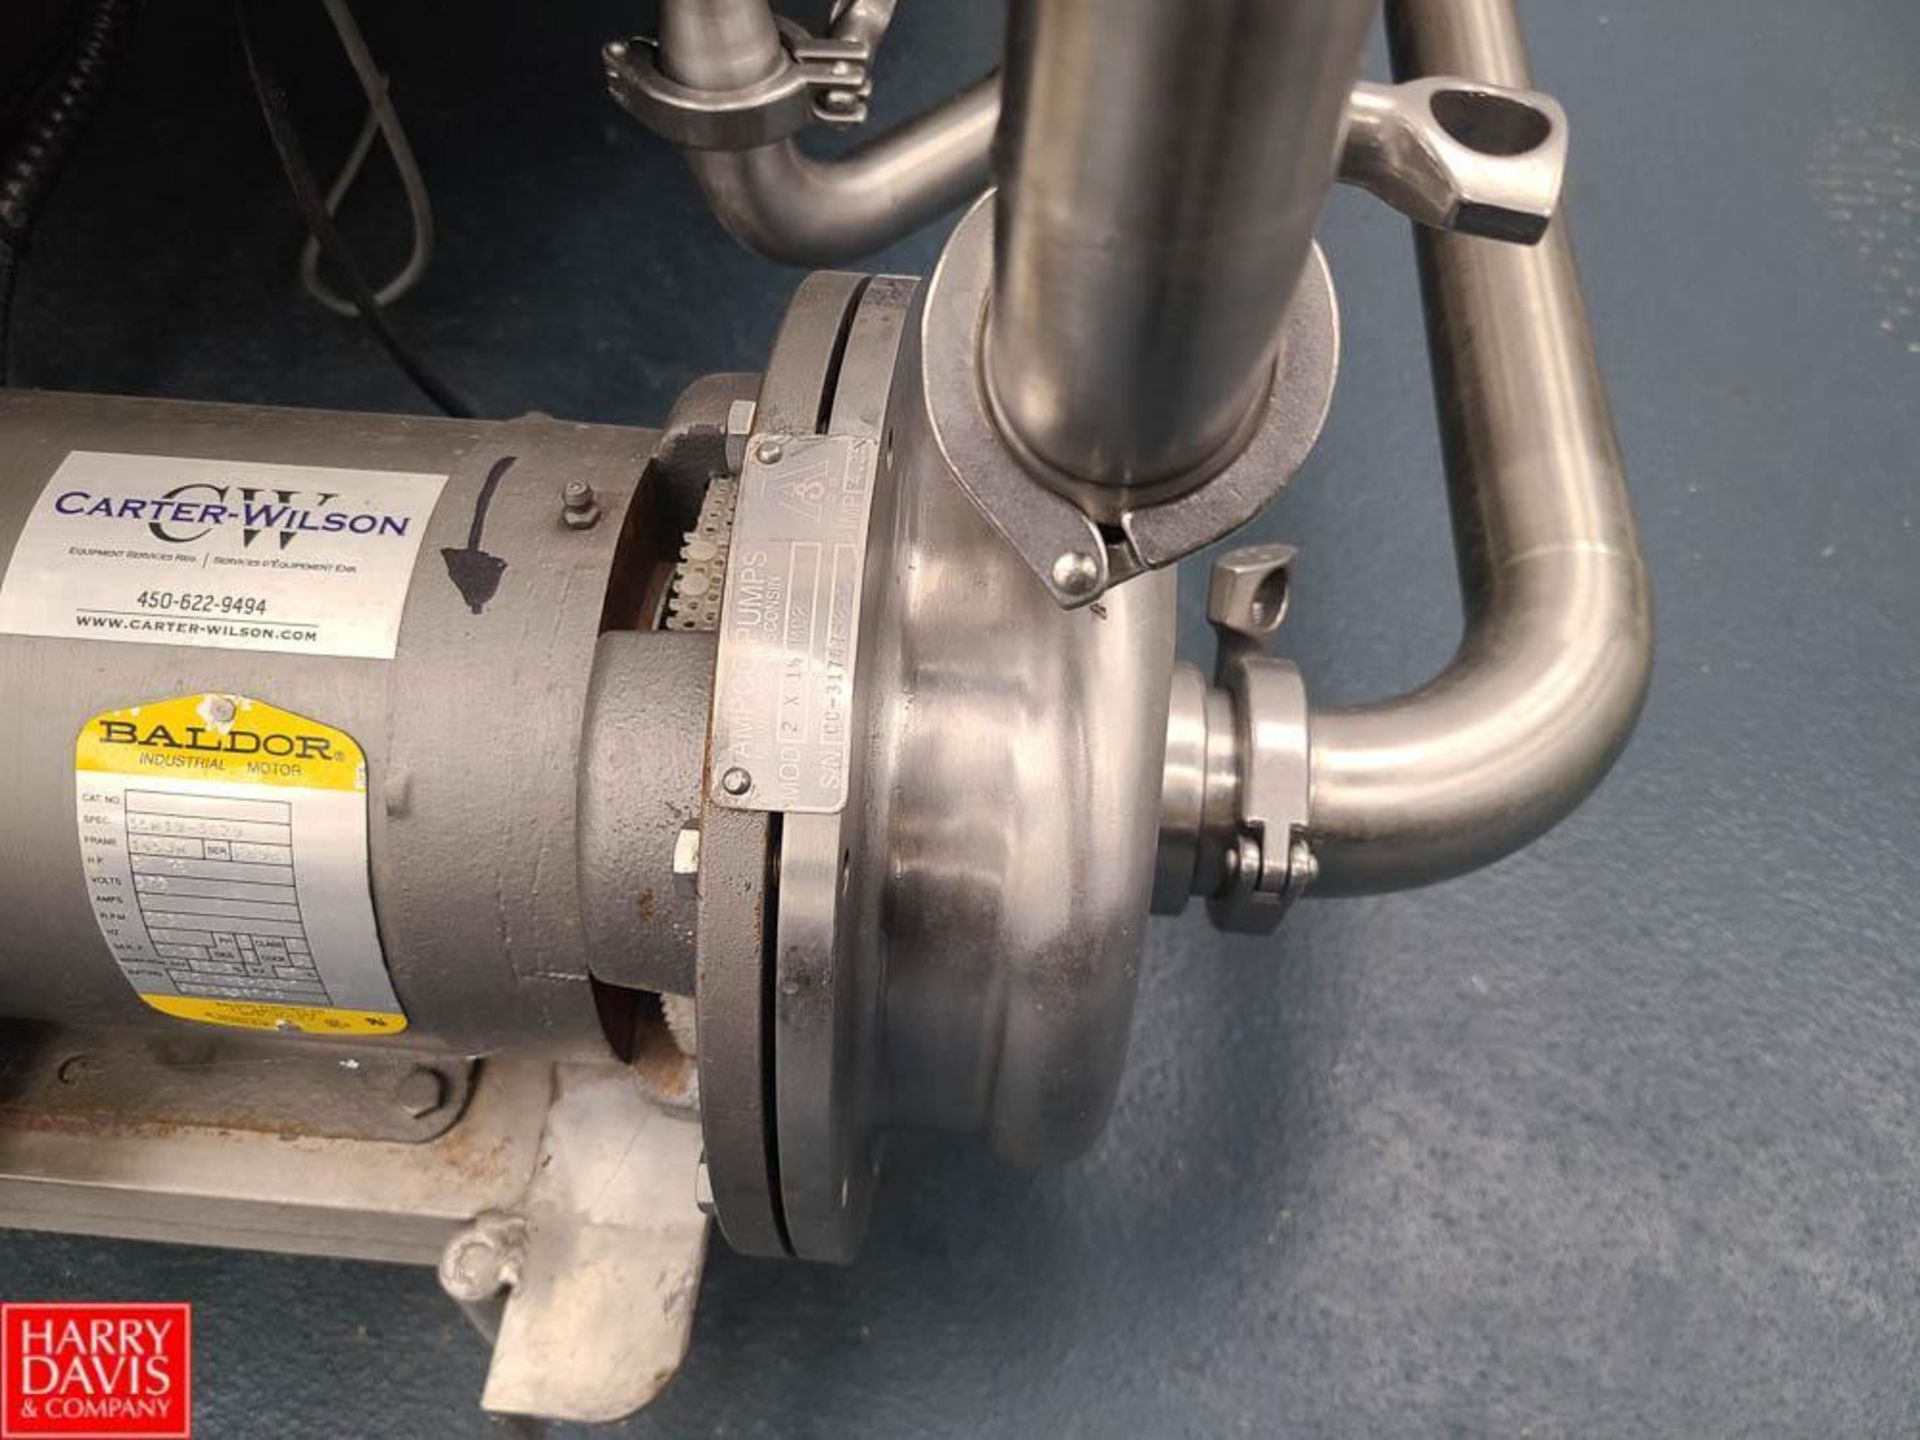 Ampco Centrifugal Pump, Model: 2X1 1/2 MC2 with 3 HP Motor - Rigging Fee: $100 - Image 2 of 4